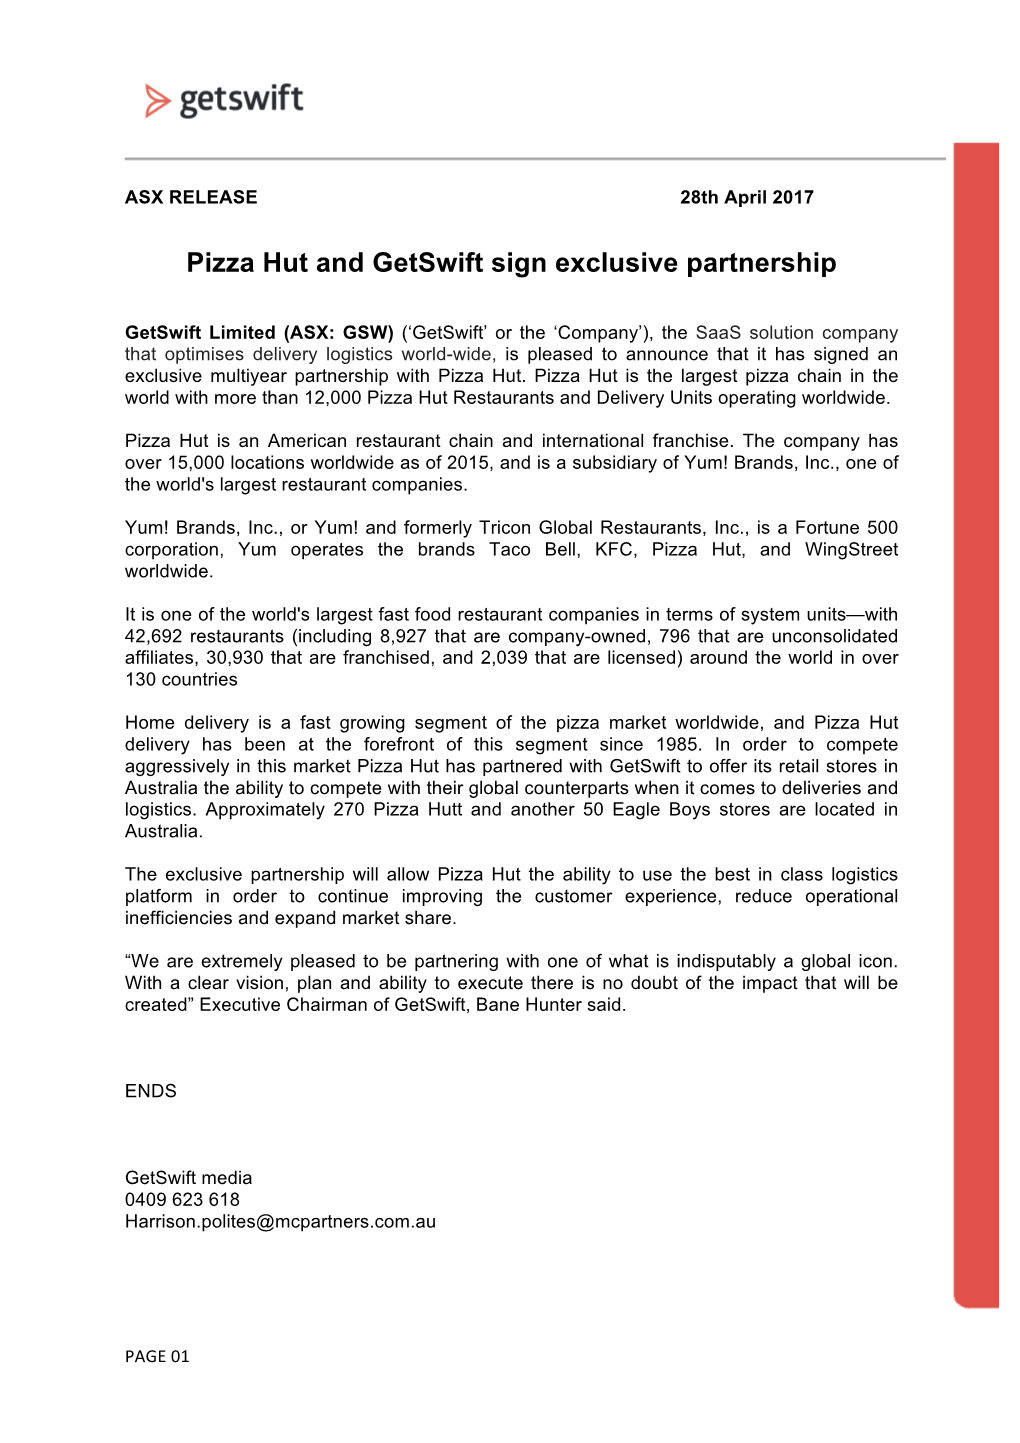 Pizza Hut and Getswift Sign Exclusive Partnership